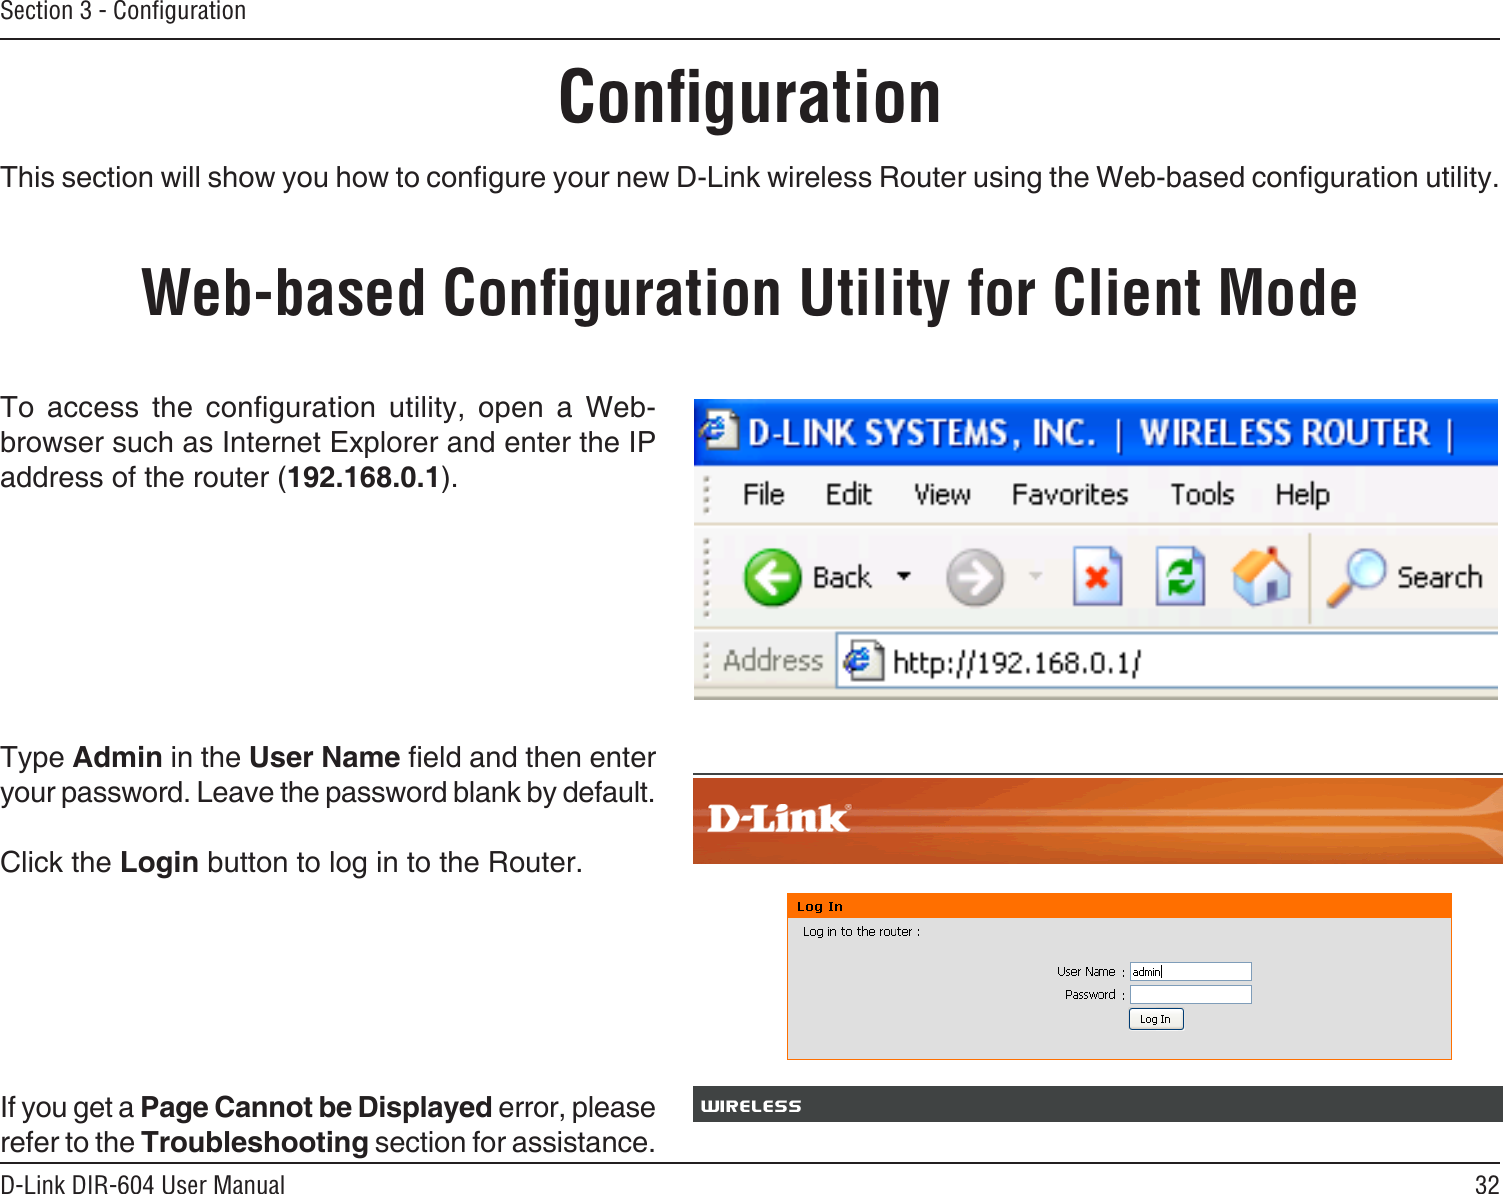 32D-Link DIR-604 User ManualSection 3 - ConﬁgurationConﬁgurationThis section will show you how to congure your new D-Link wireless Router using the Web-based conguration utility.Web-based Conﬁguration Utility for Client ModeTo  access  the  conguration  utility,  open  a  Web-browser such as Internet Explorer and enter the IP address of the router (192.168.0.1).Type Admin in the User Name eld and then enter your password. Leave the password blank by default. Click the Login button to log in to the Router.If you get a Page Cannot be Displayed error, please refer to the Troubleshooting section for assistance.